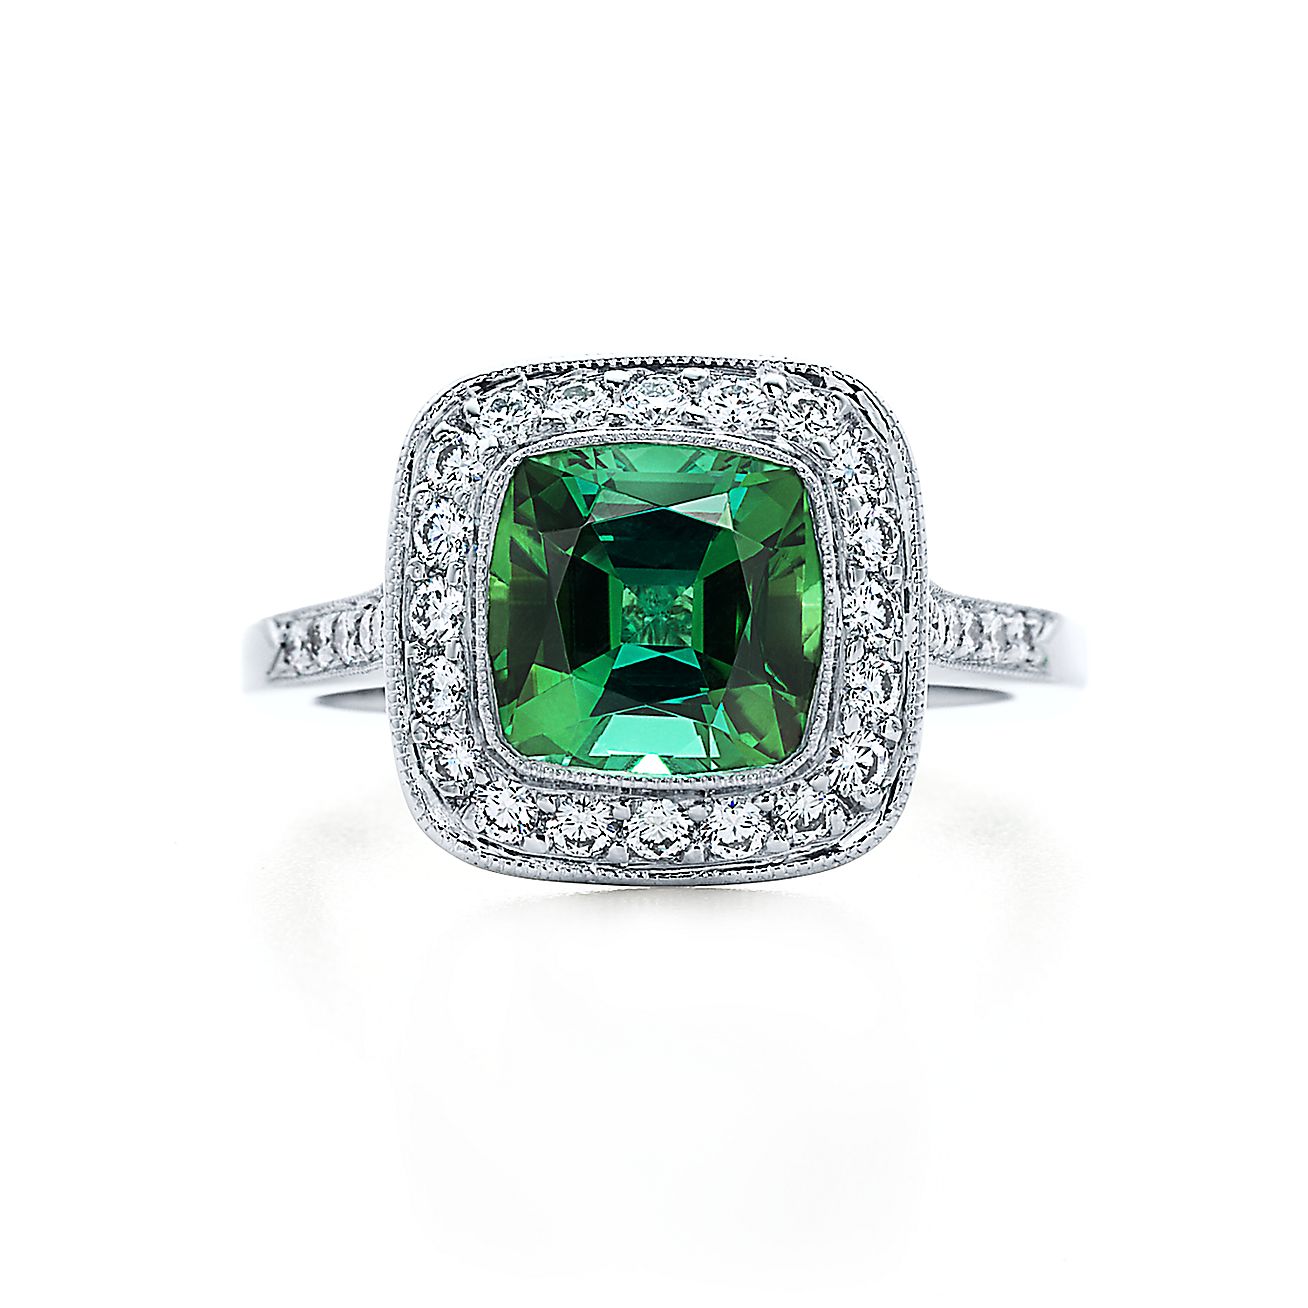 Tiffany Legacy Collection™ ring with a green tourmaline and diamonds in ...